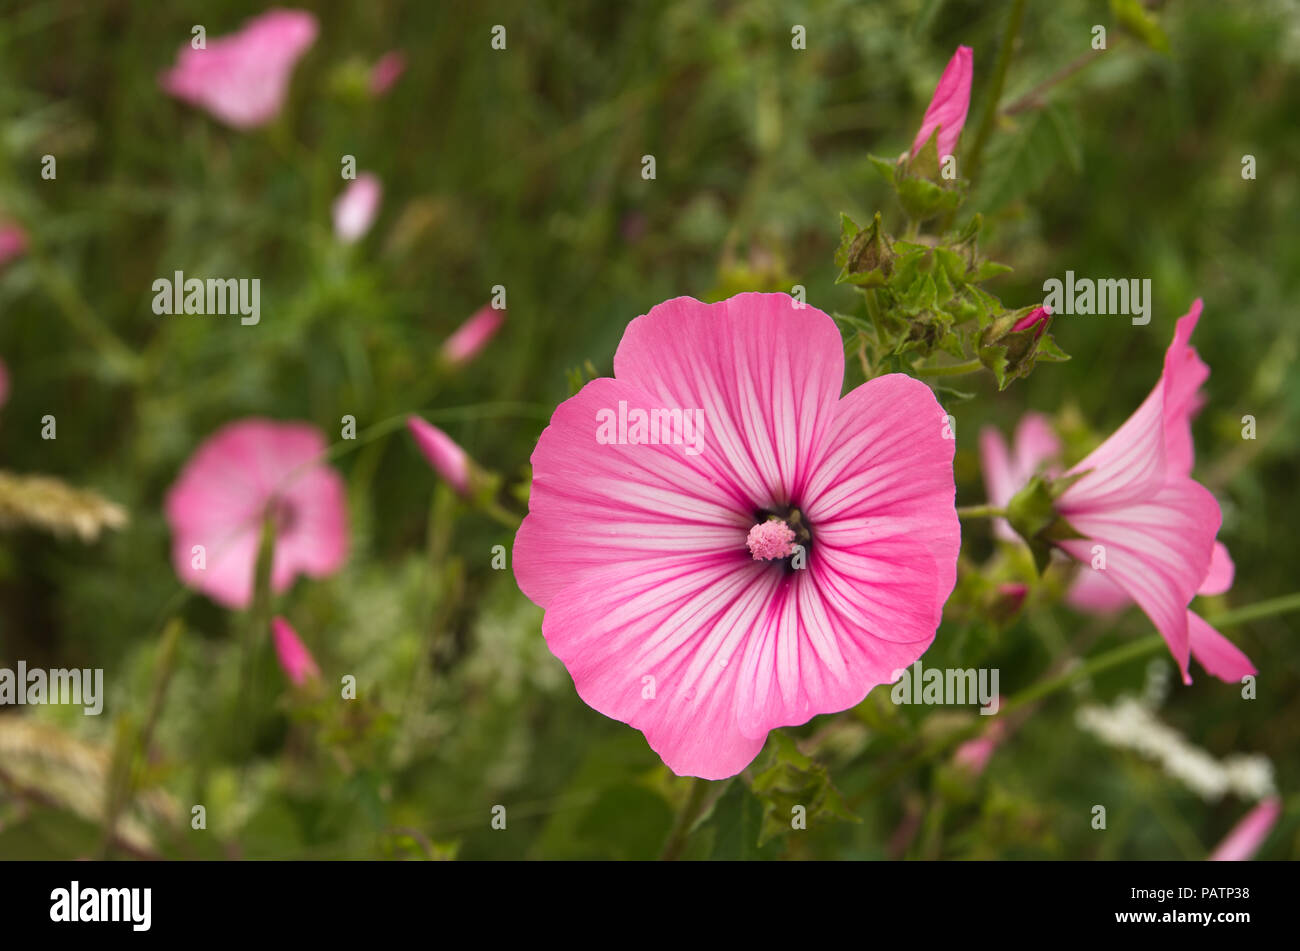 Annual mallow, rose mallow or royal mallow (Lavatera trimestris) bright rose flowers. A wild plant of Malvaceae family. Arrabida Nature Park, Portugal Stock Photo